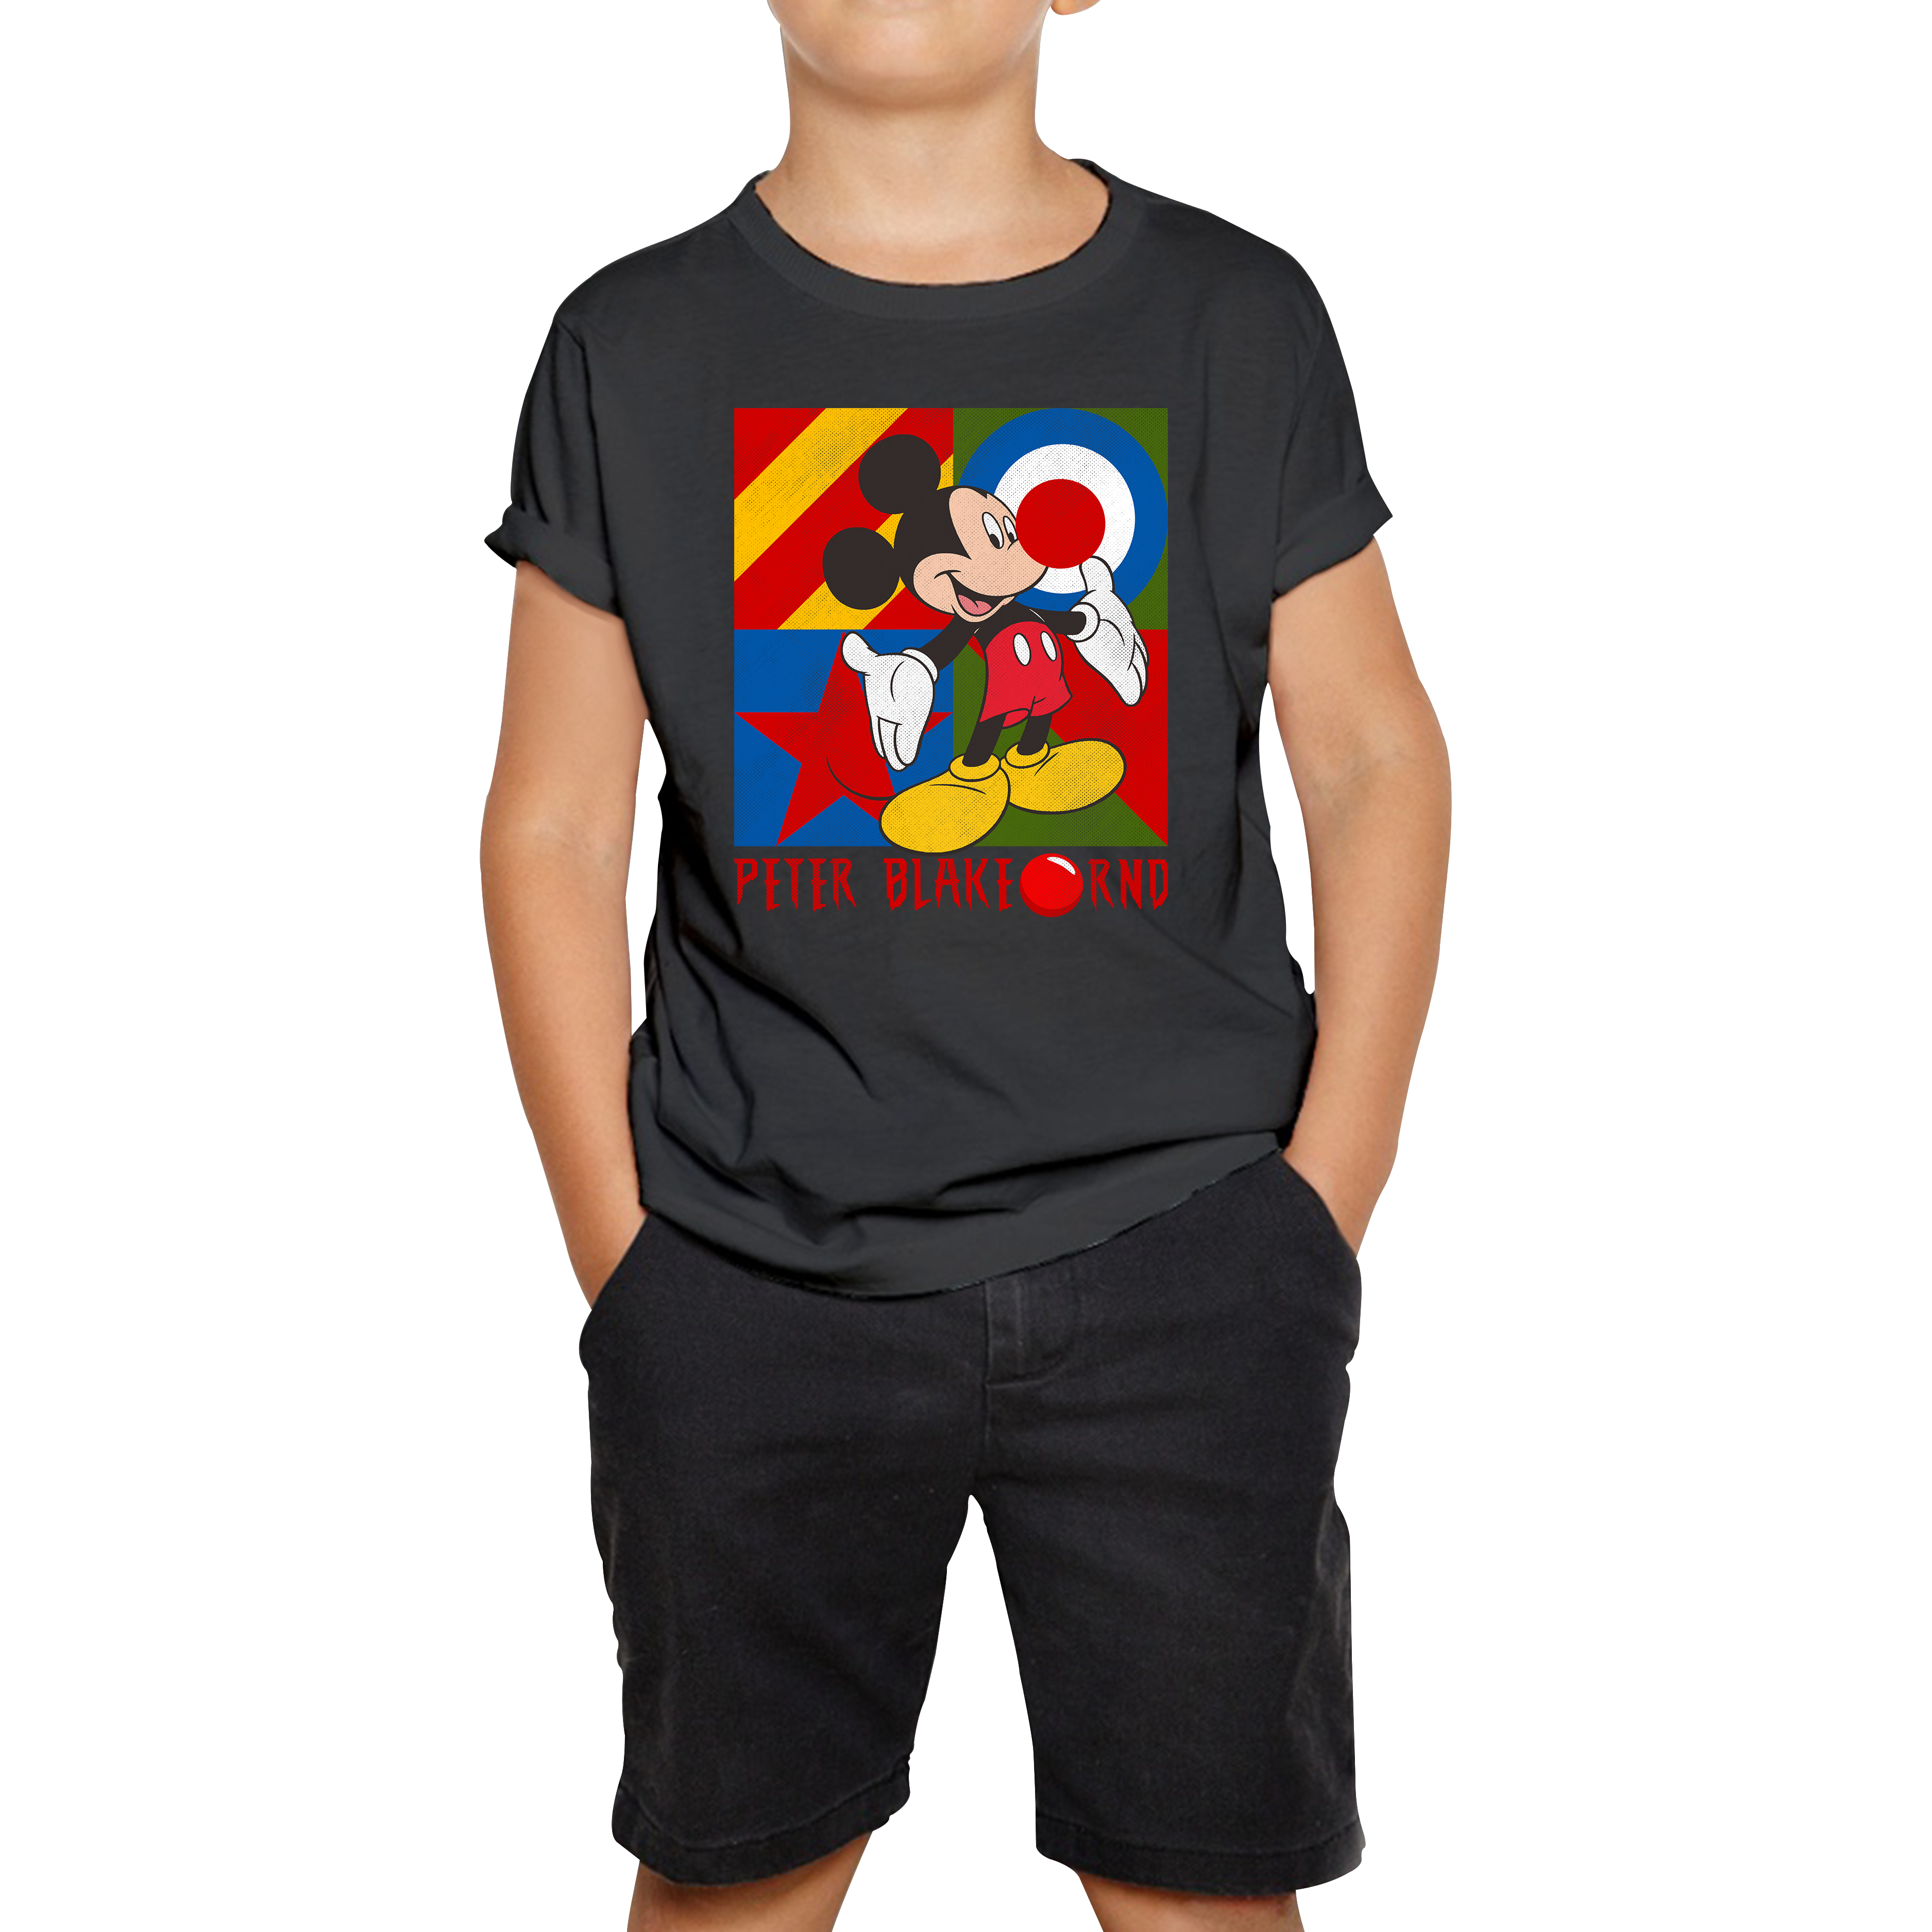 Peter Blake Mickey Mouse Red Nose Day Kids T Shirt. 50% Goes To Charity